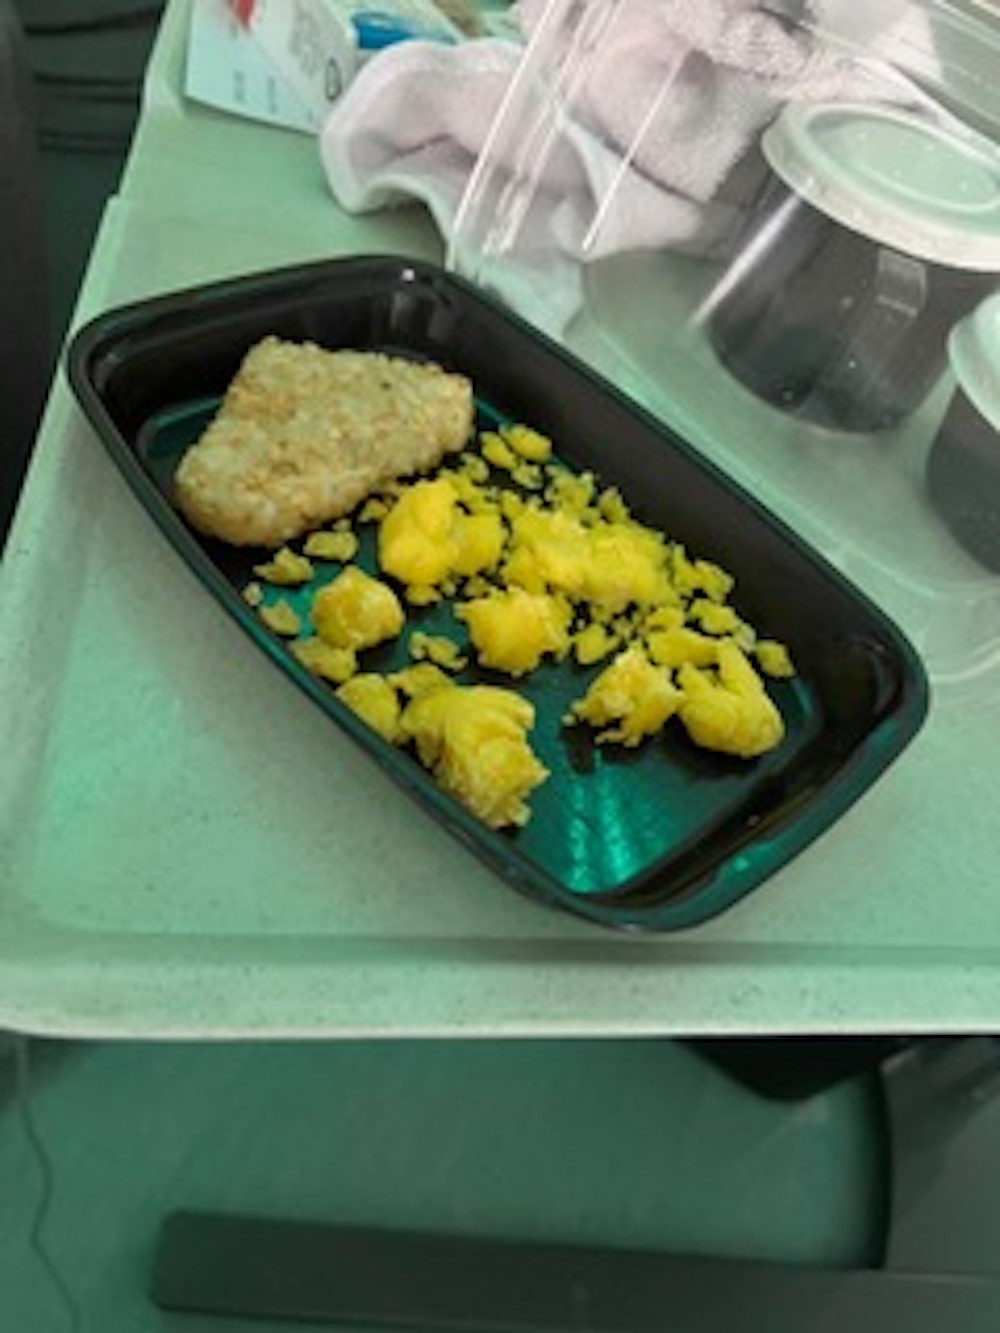 A photo of scrambled eggs and a hash brown in a black, disposable takeout container. The scrambled eggs do not fill the container – they are sparsely scattered across the bottom, and look very dry and chunky. The hash brown is pale.